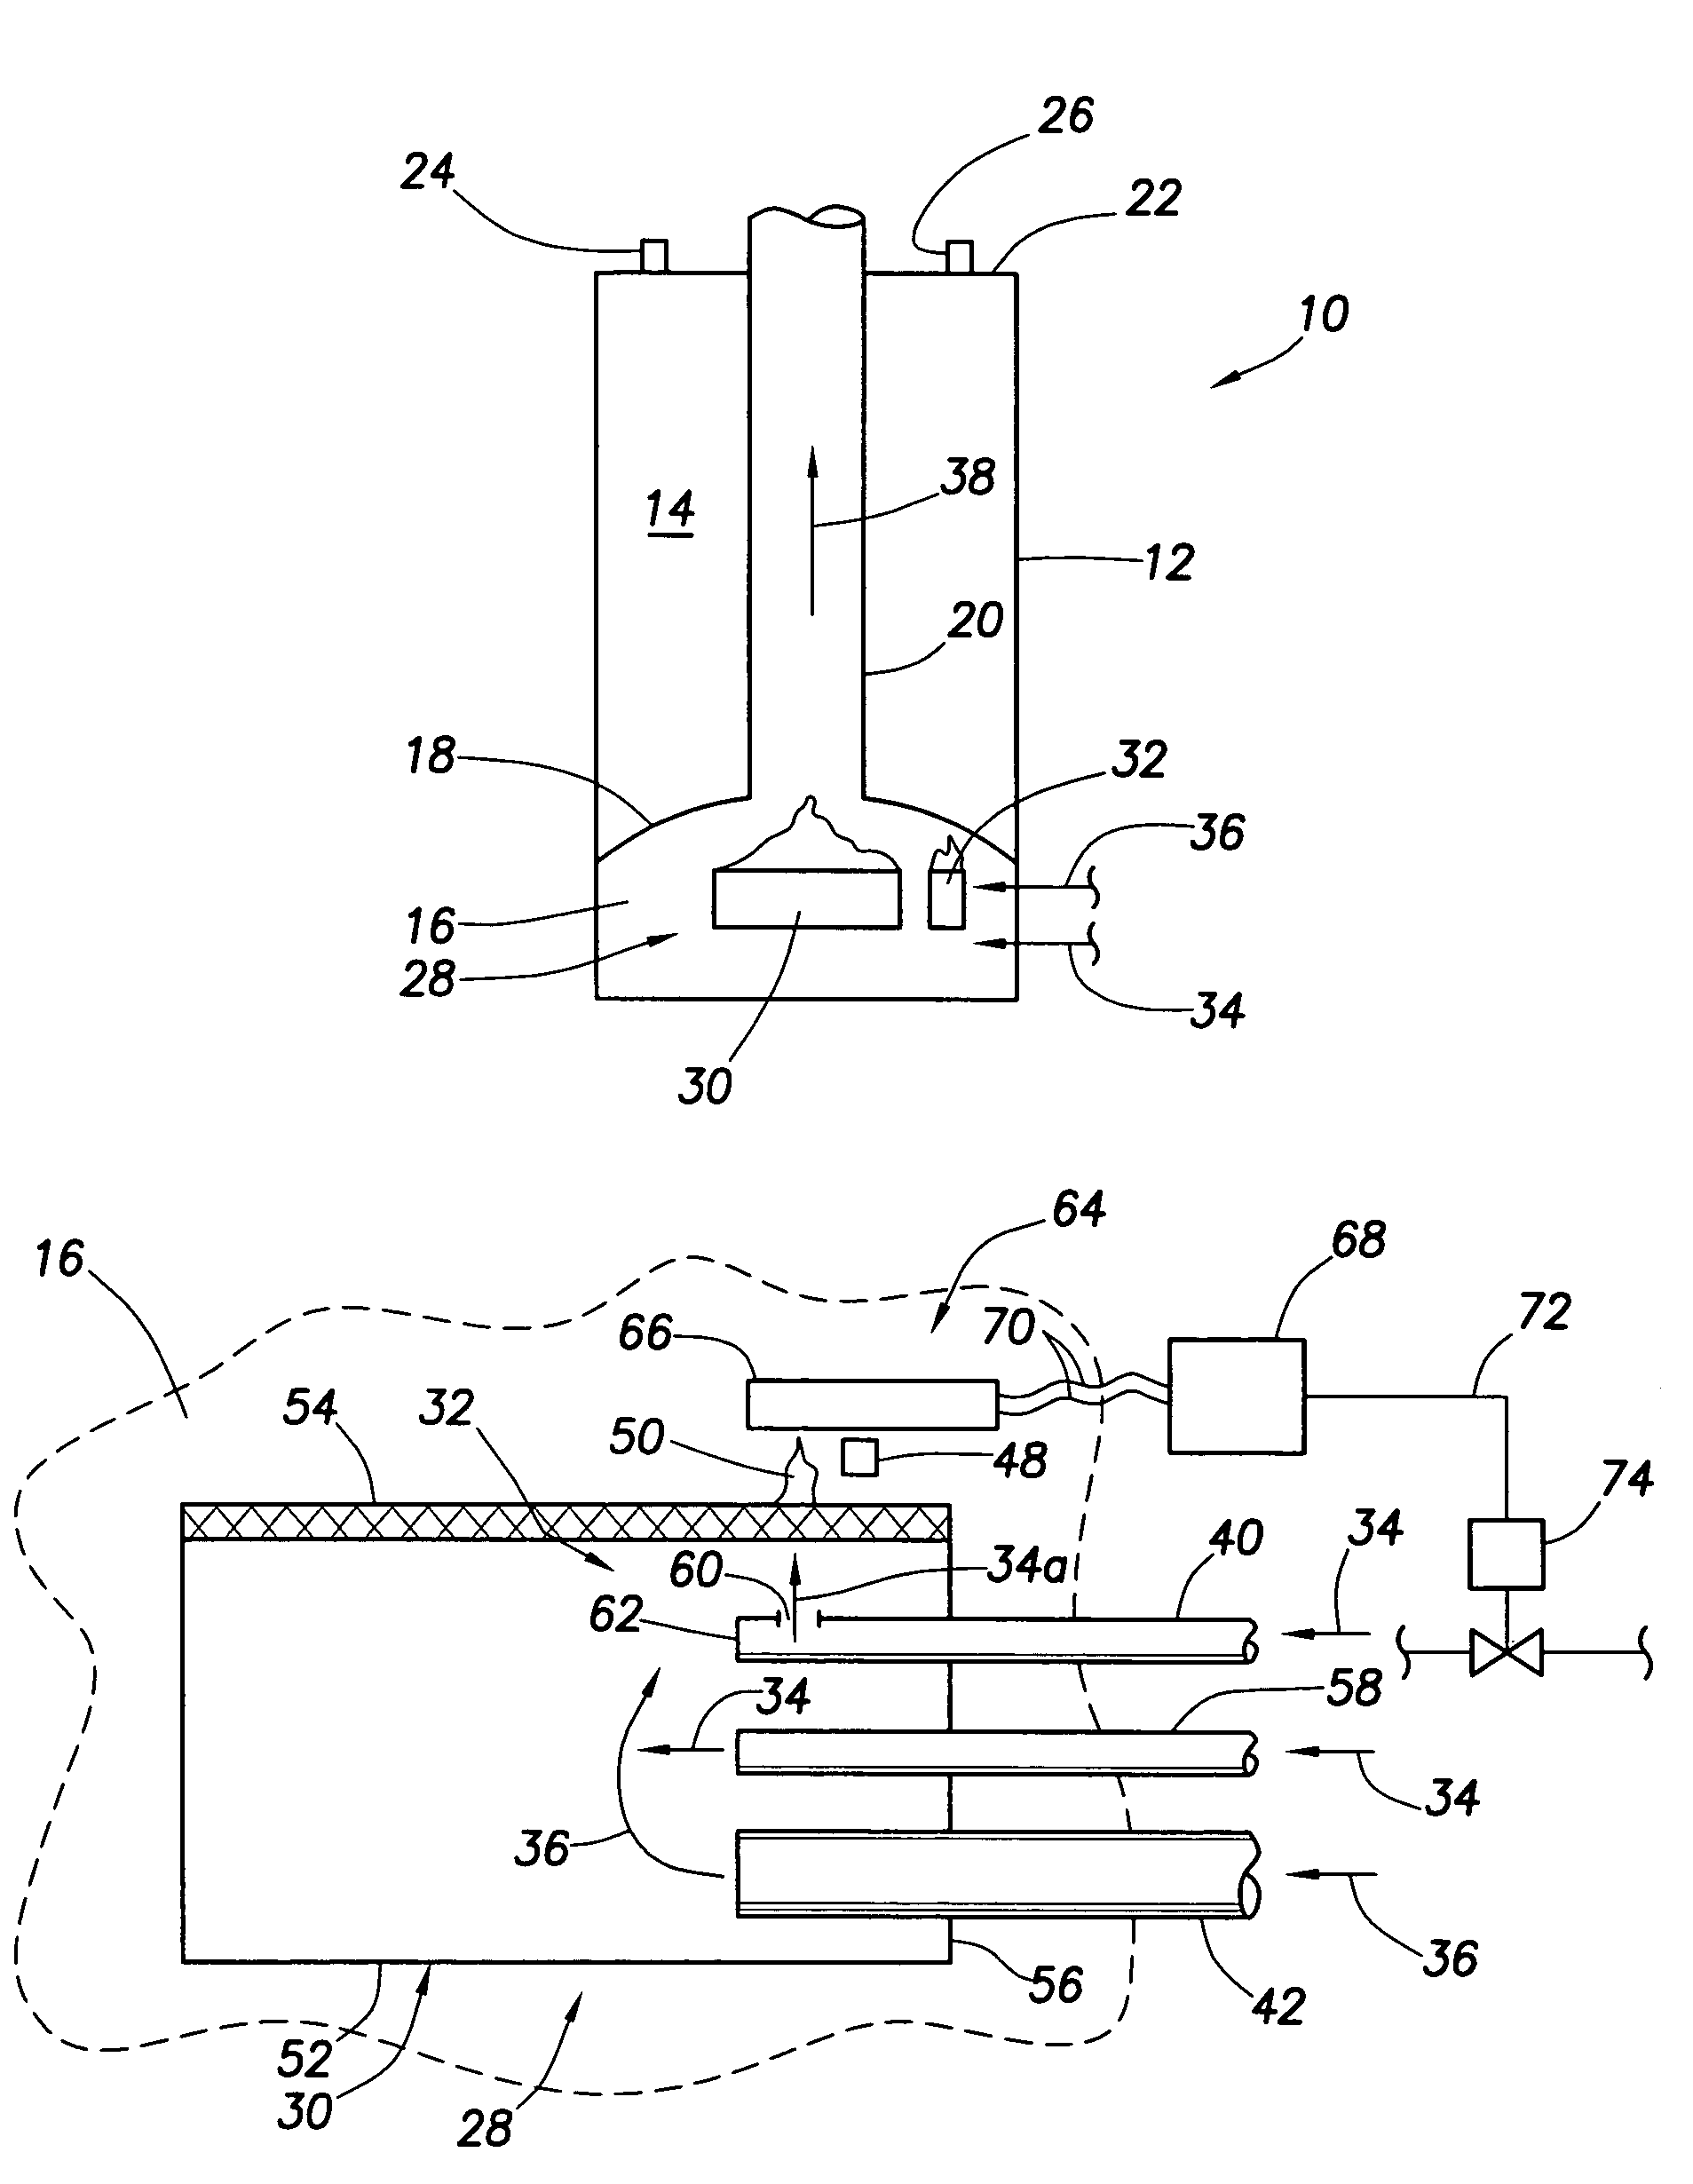 Water heater having raw fuel jet pilot and associated burner clogging detection apparatus